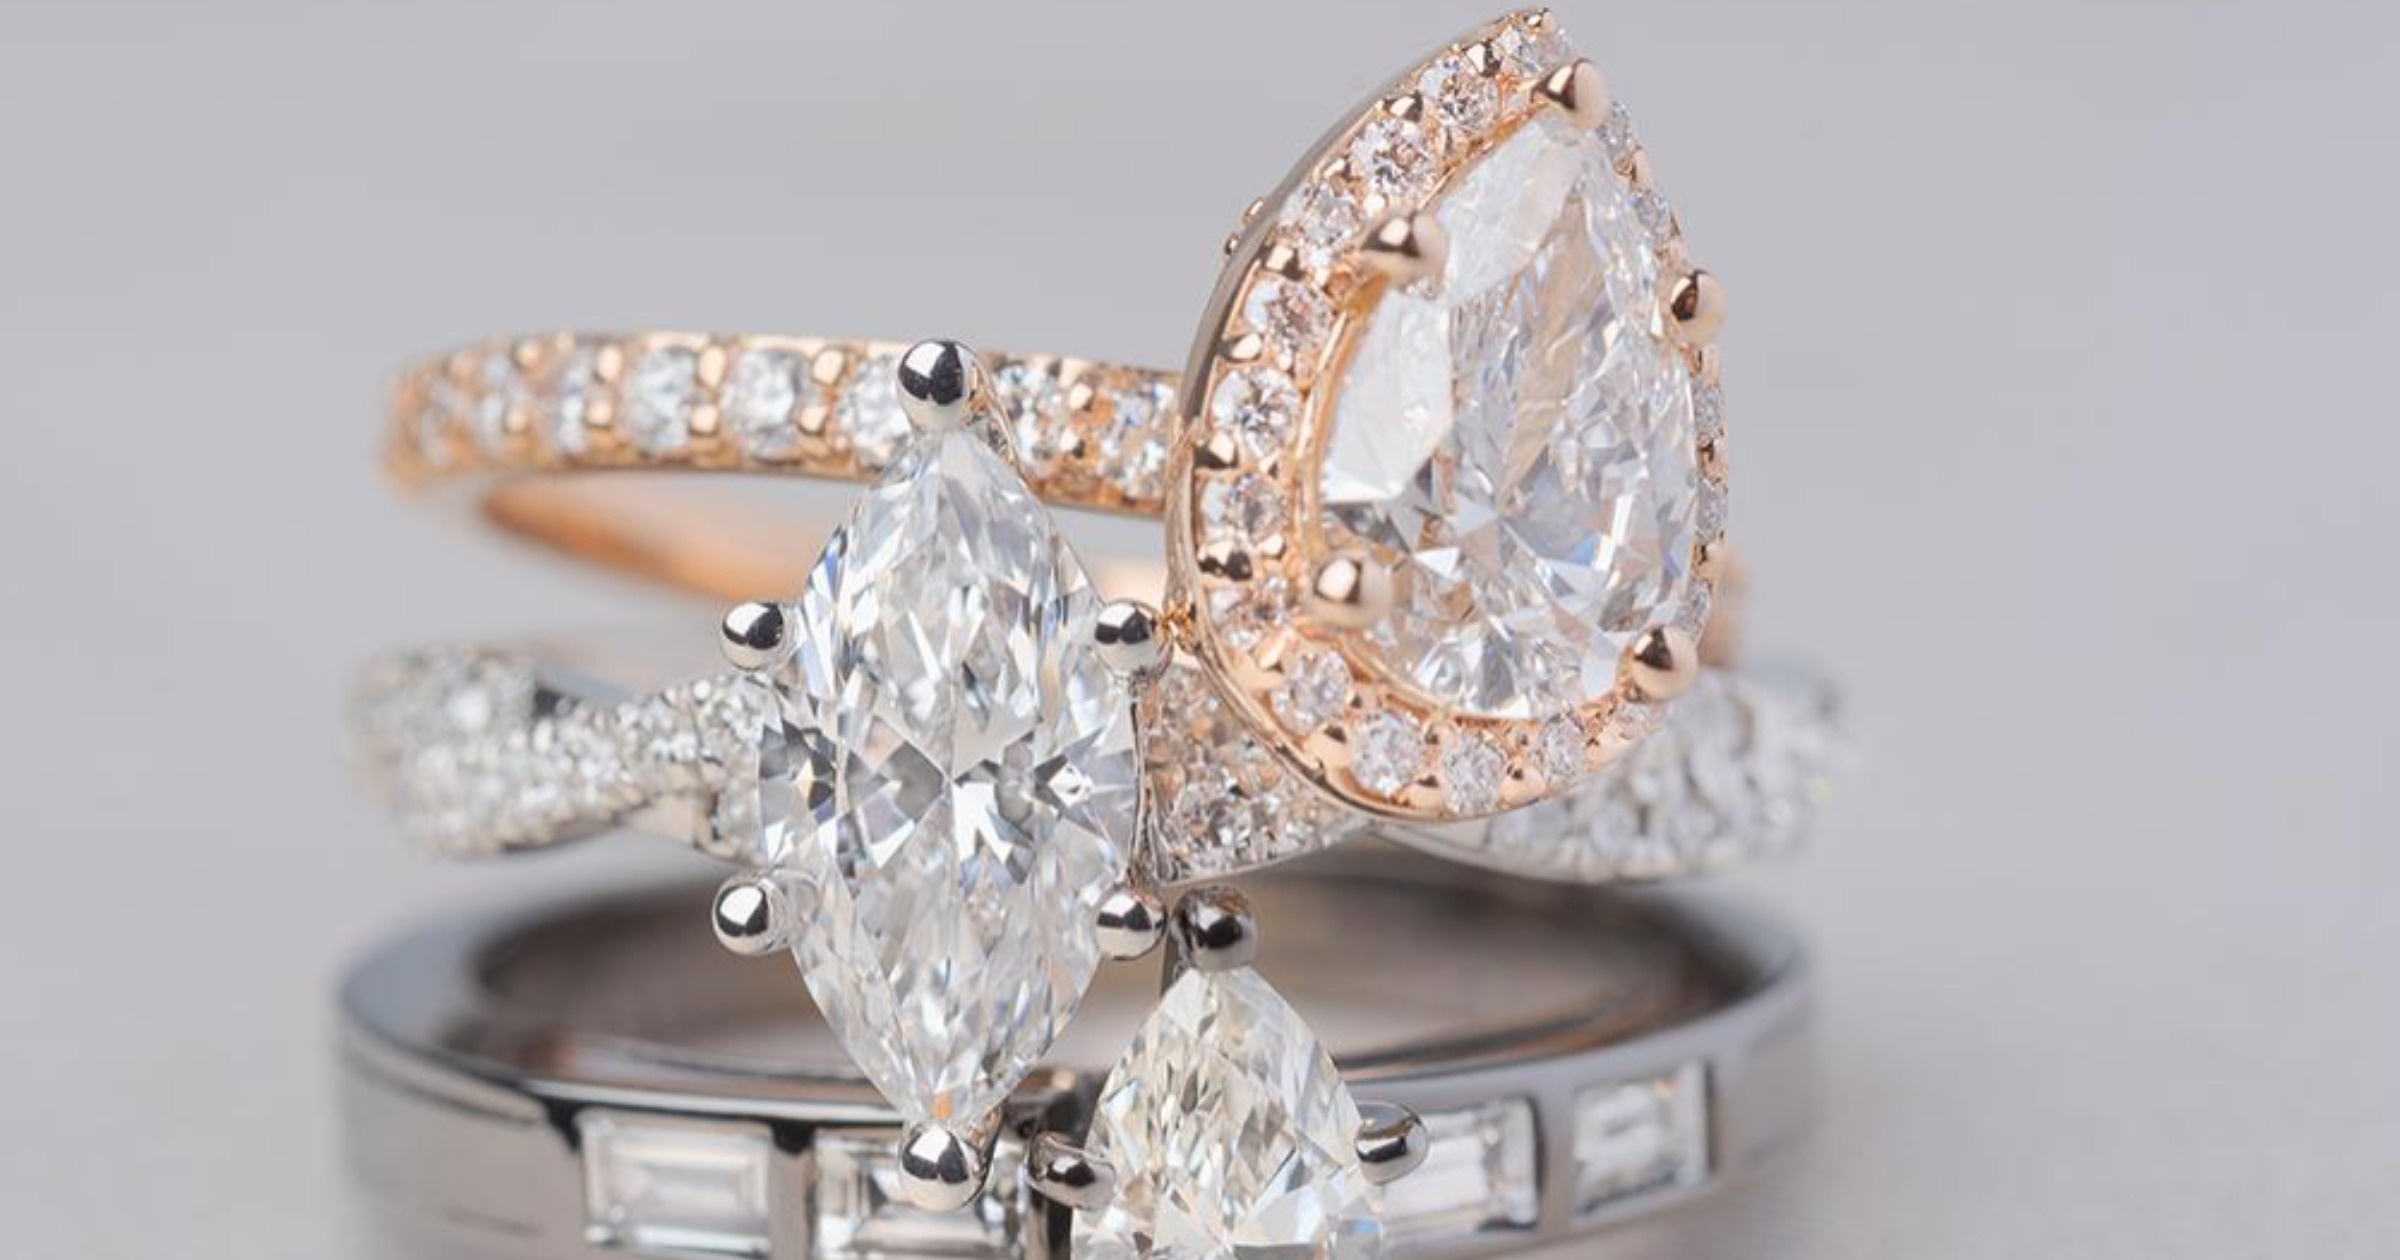 Learn About The Sustainability of Lab Grown Diamonds